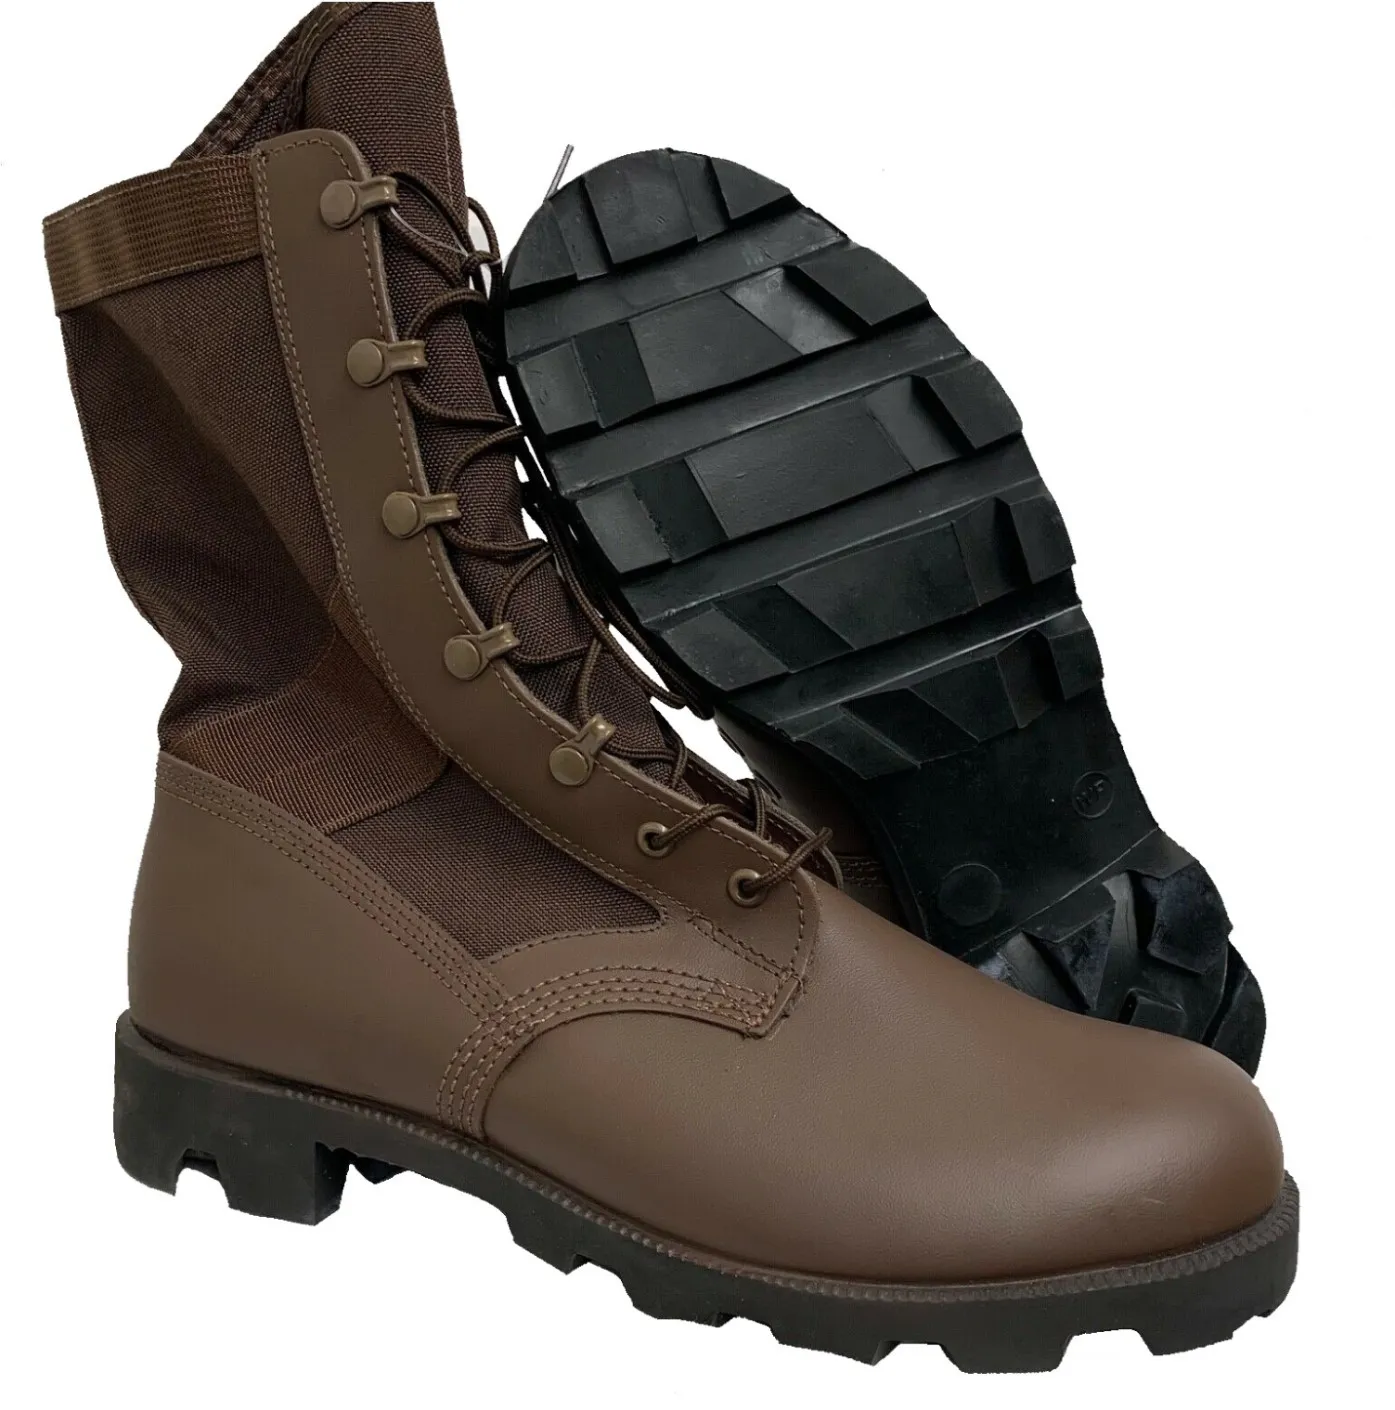 Wellco British Army Jungle Boots- Brown- from £24.99